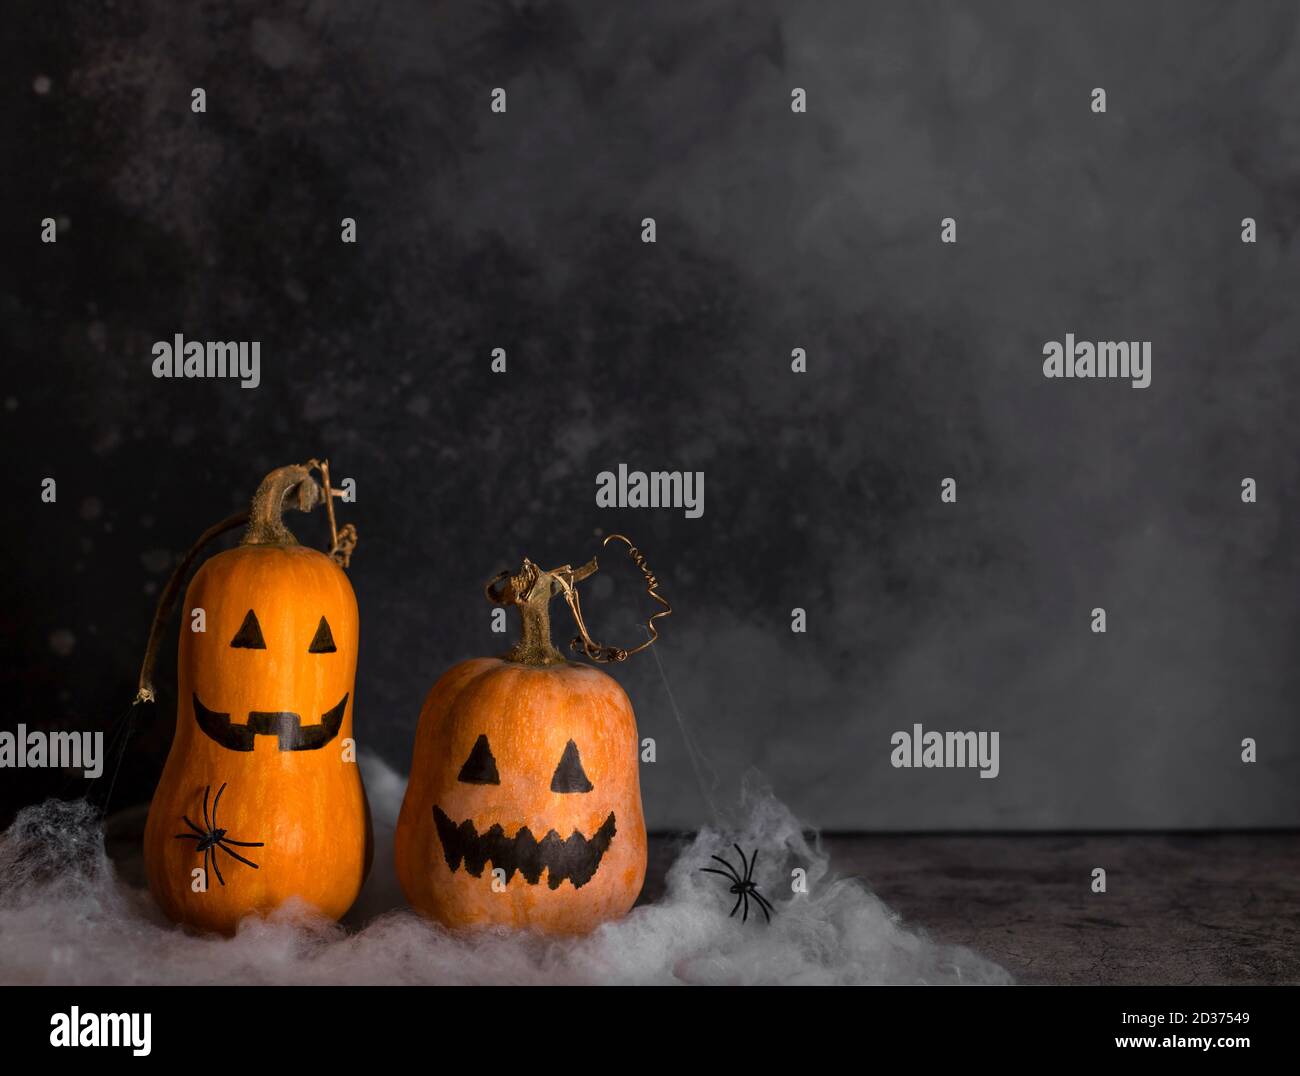 Halloween pumpkins with painted faces and a spider web with crawling spiders. Stock Photo